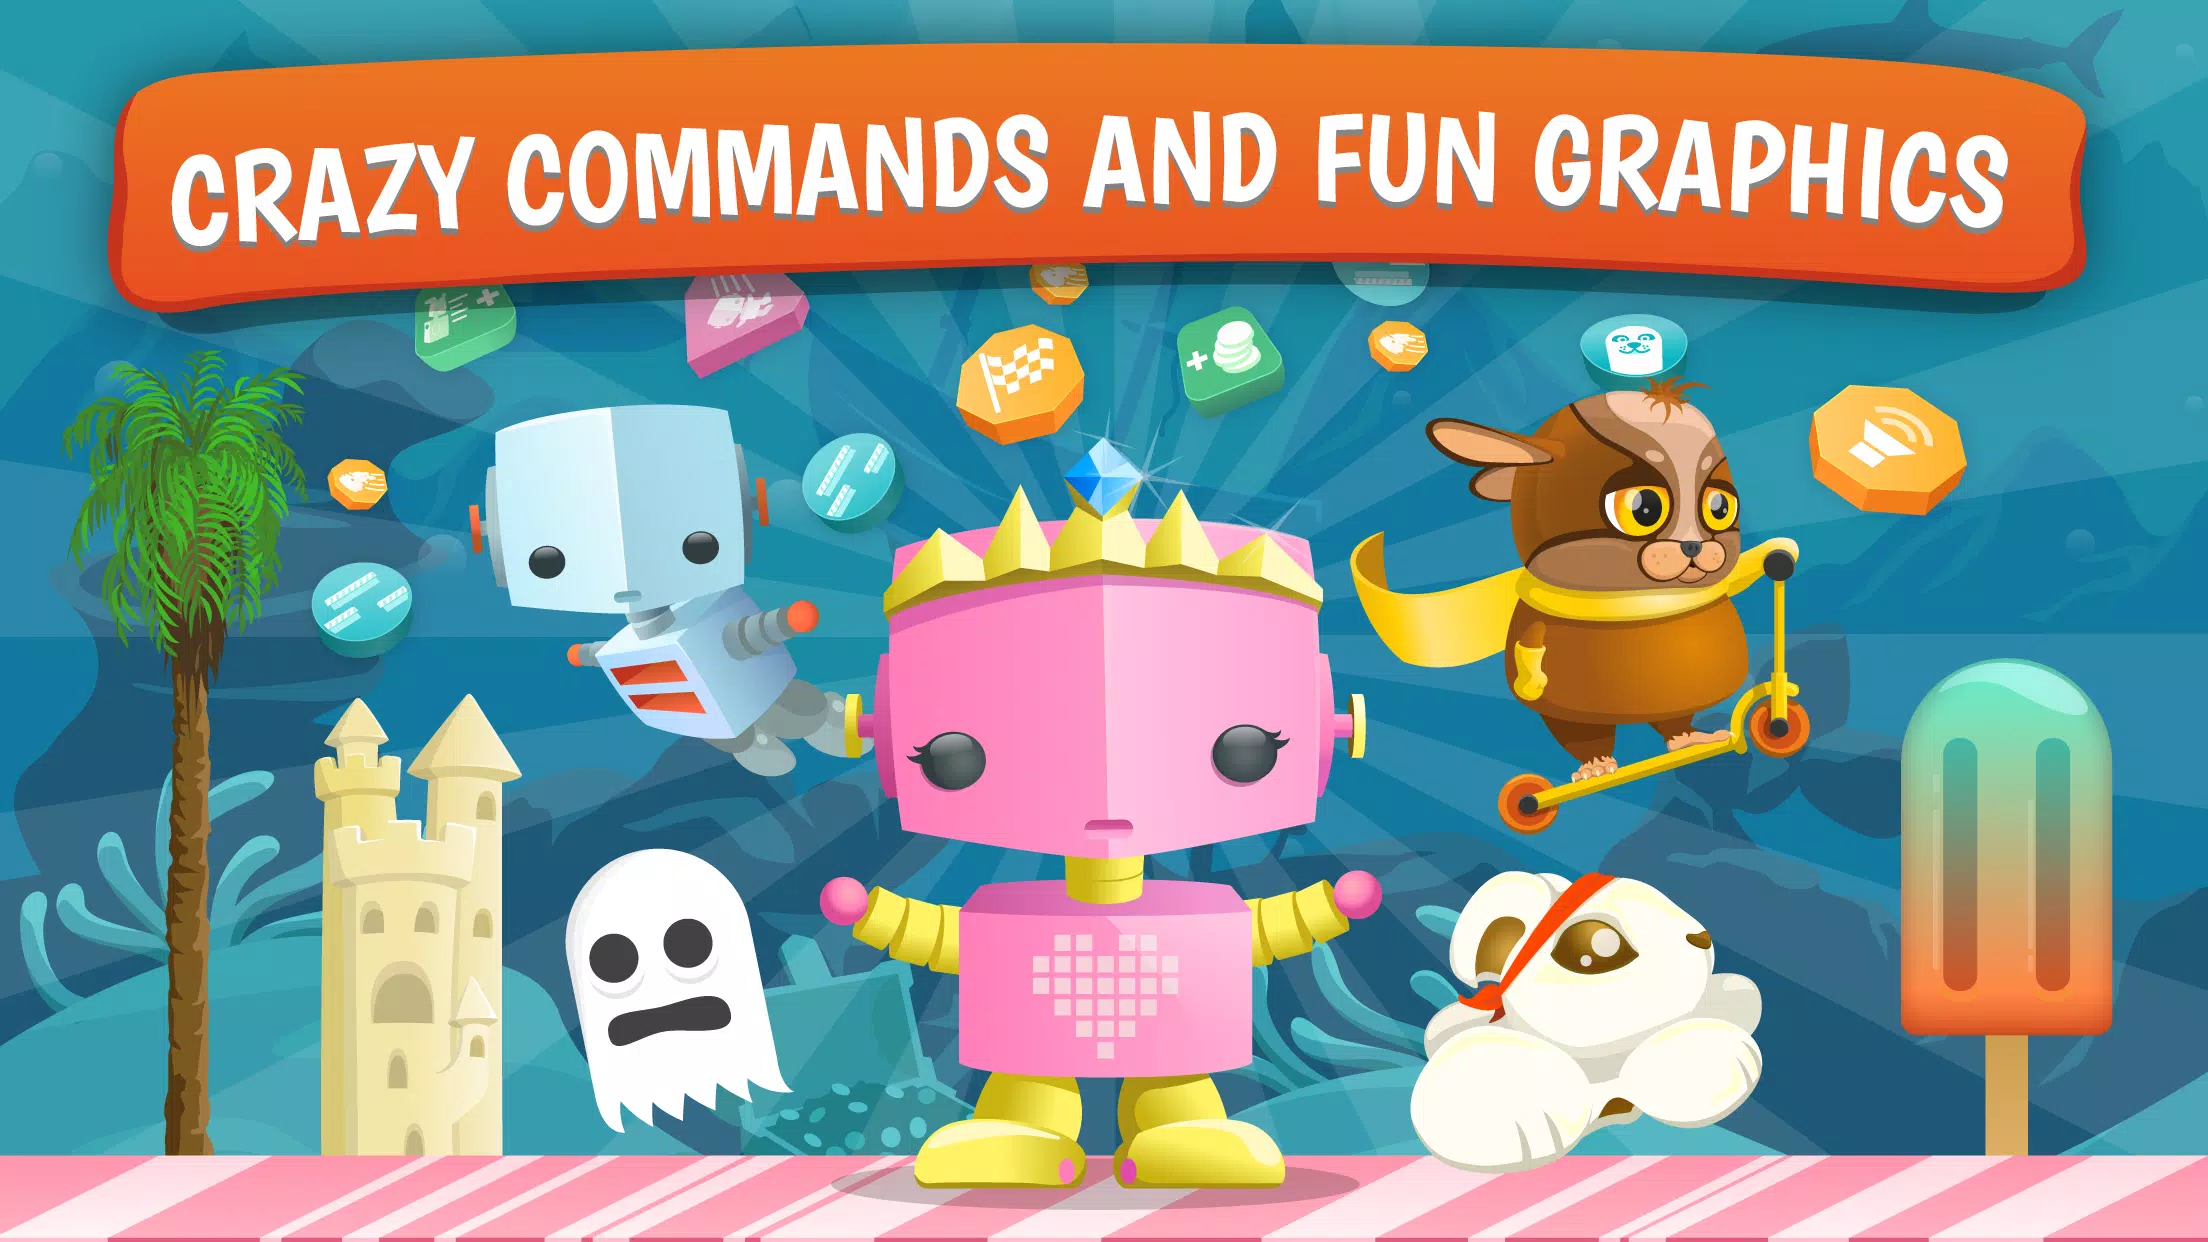 KIDS CAN CREATE THEIR OWN ONLINE GAMES WITH THE CODA GAME APP